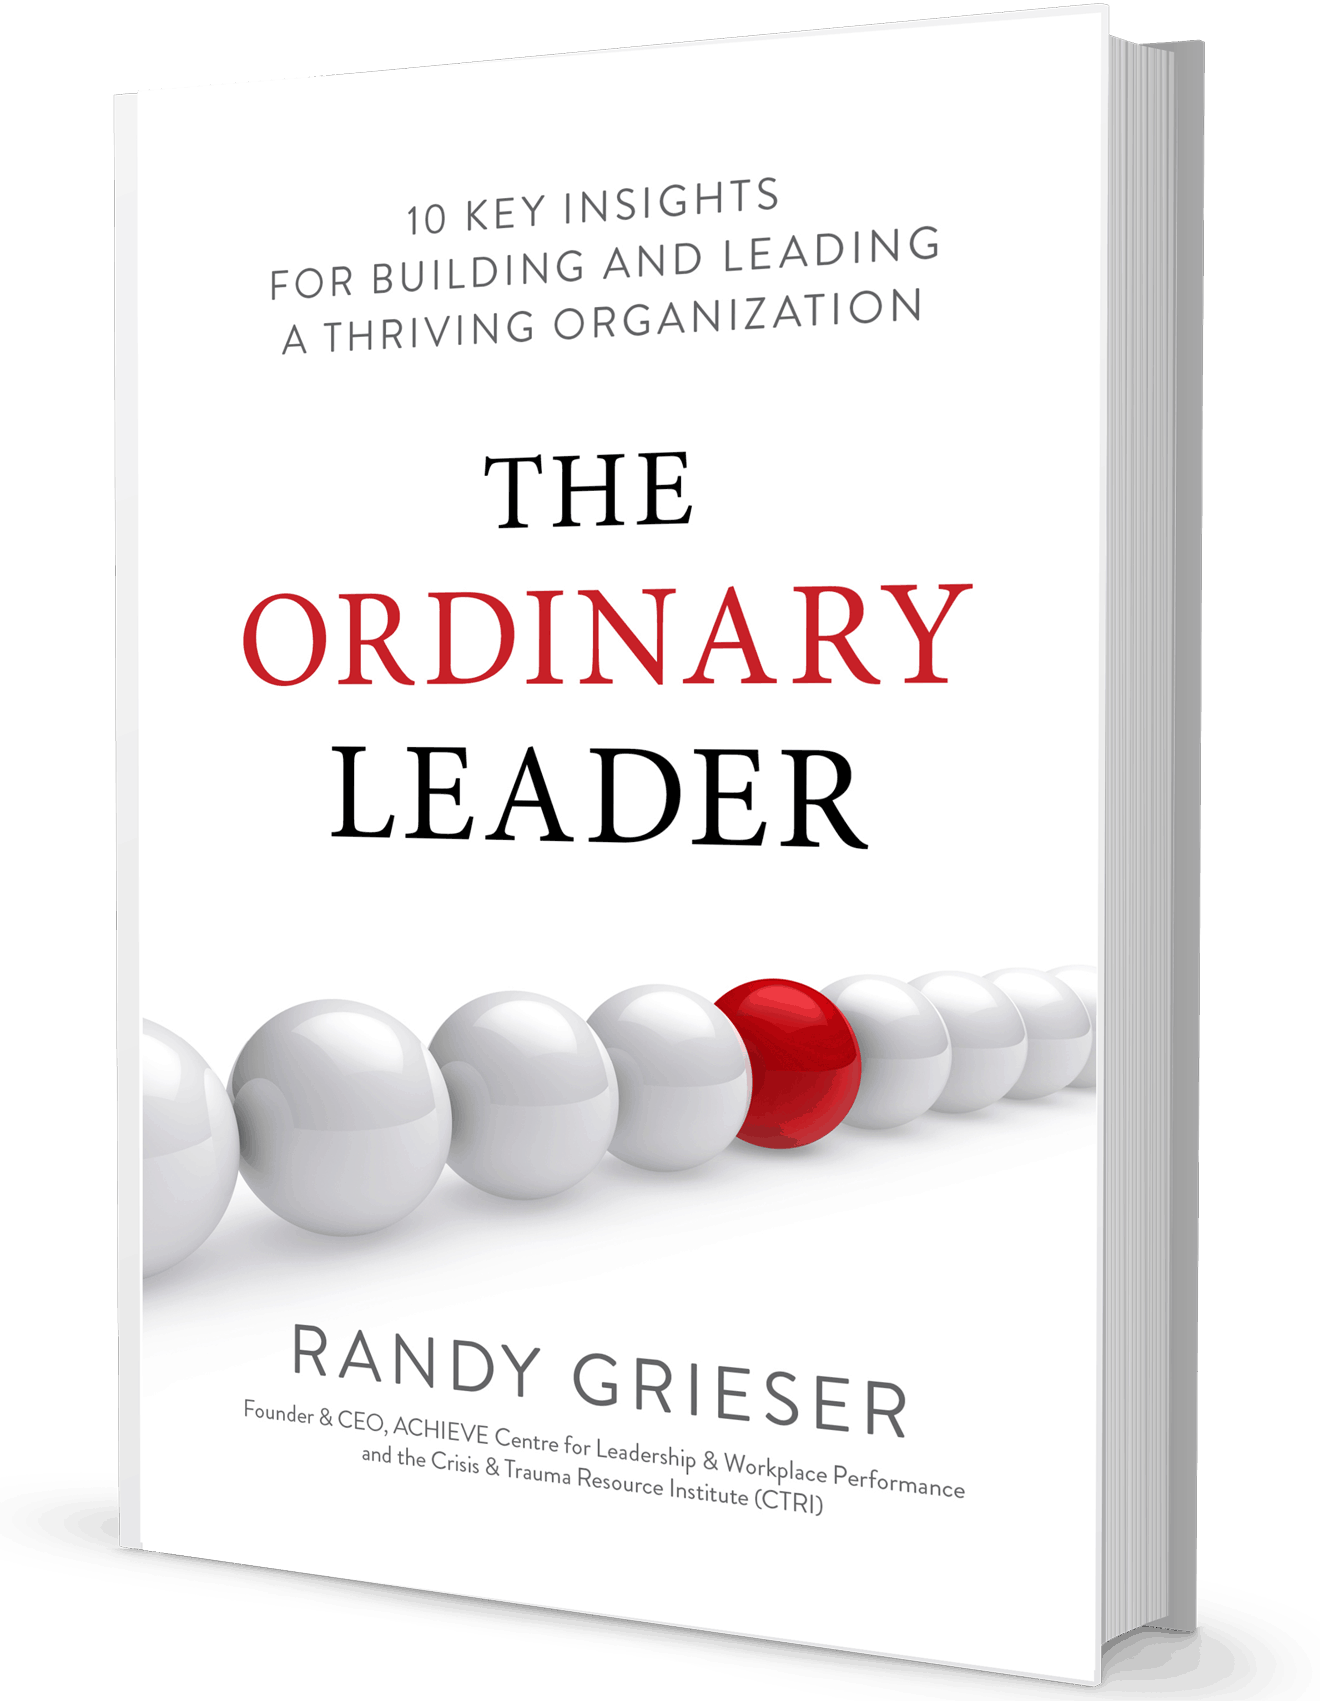 The Ordinary Leader Book Cover